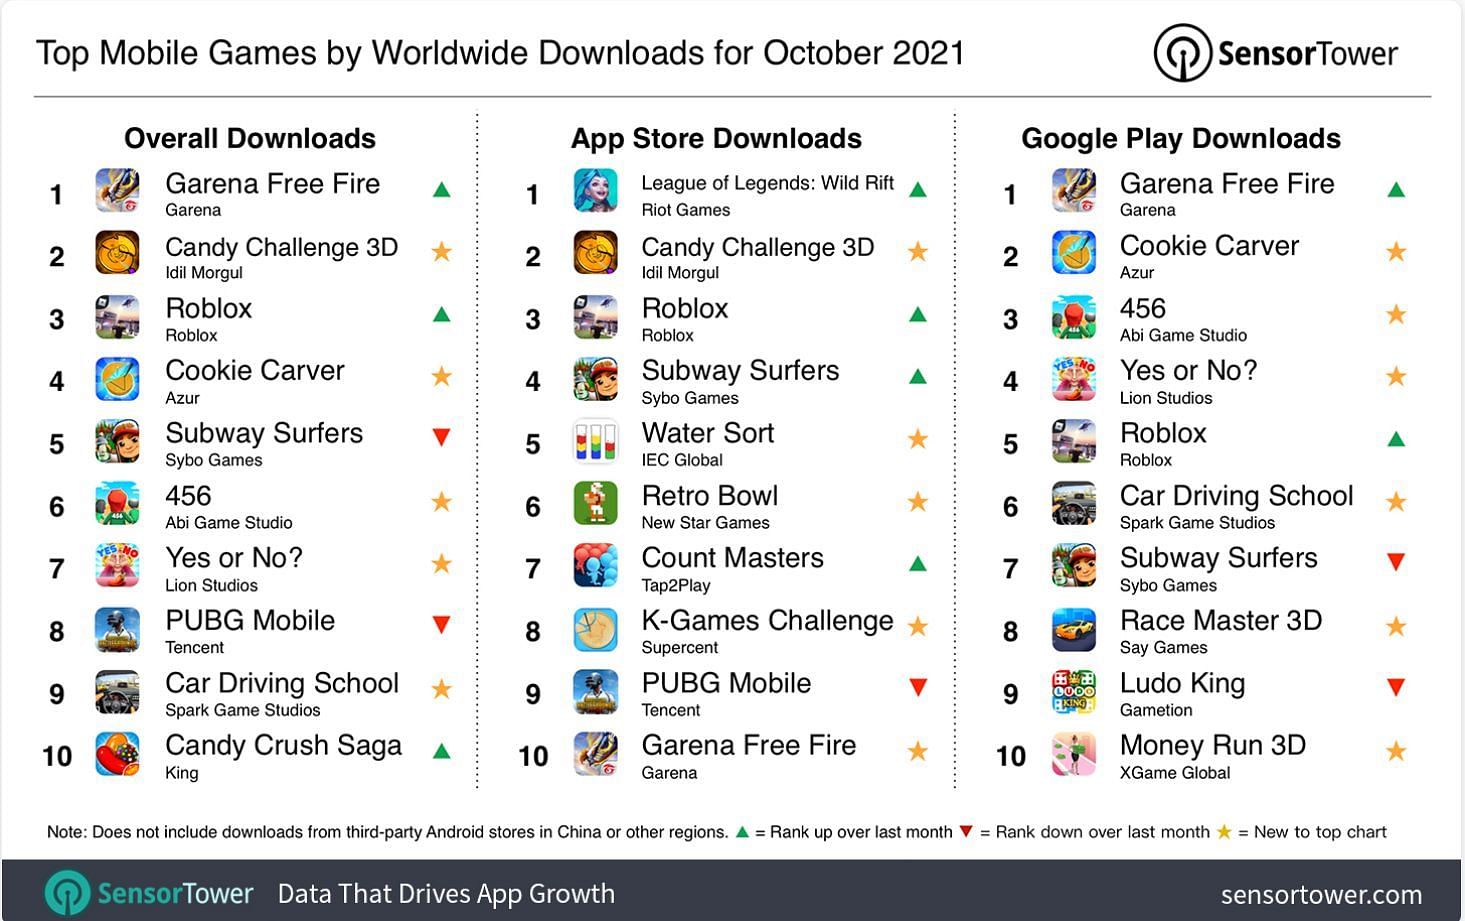 Top Mobile Games Worldwide for October 2021 by Downloads (Image via Sensor Tower )